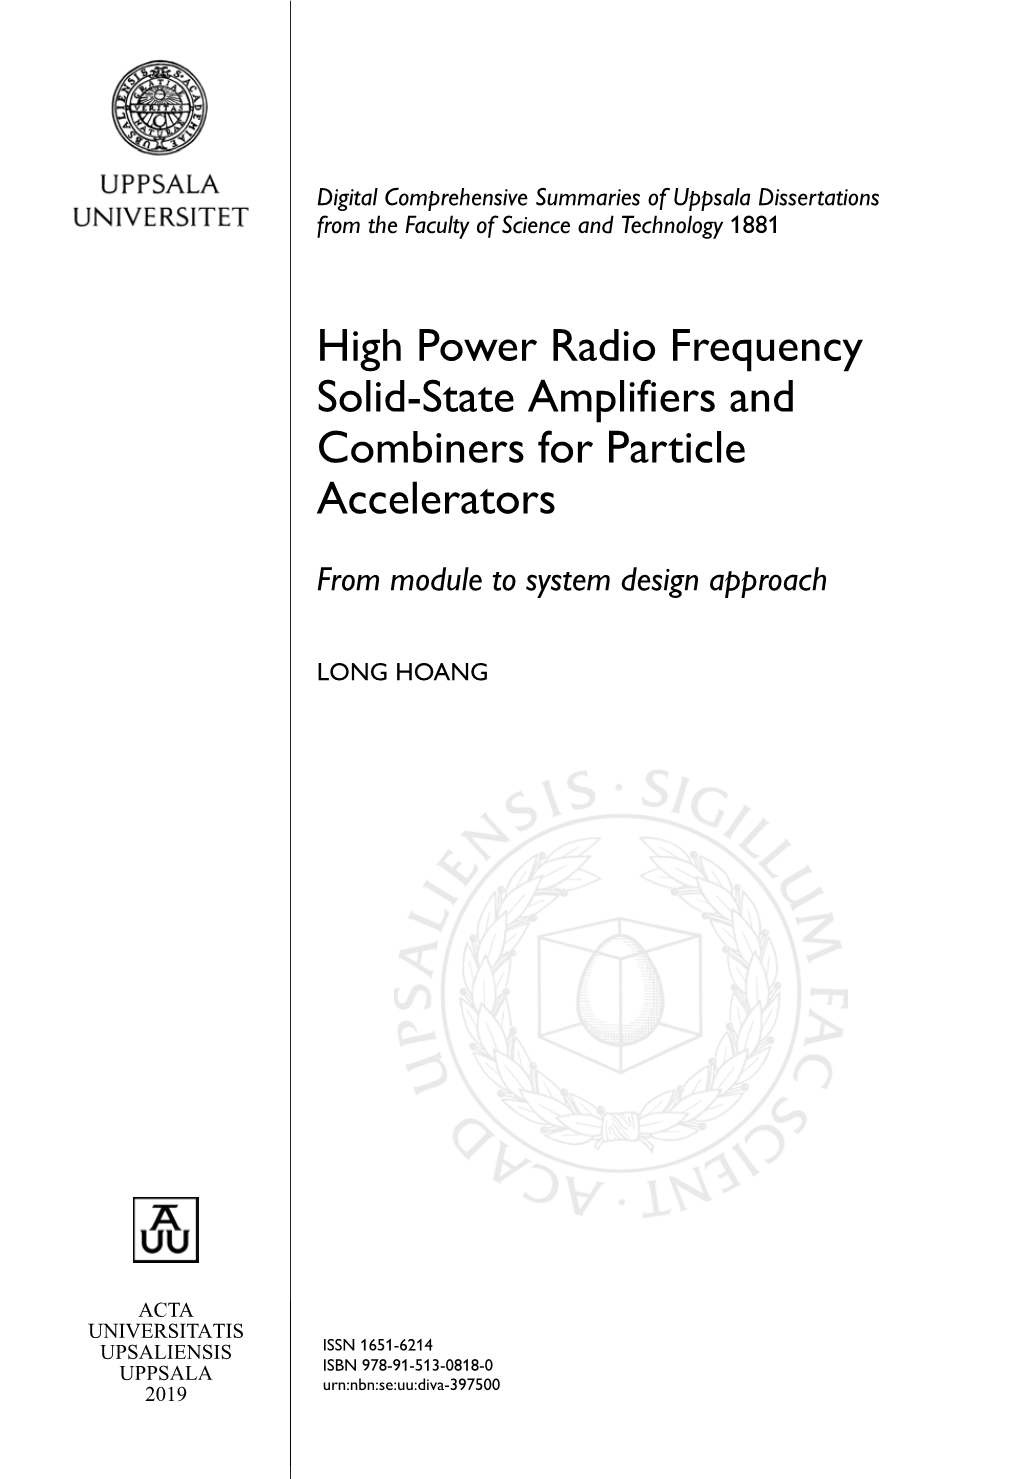 High Power Radio Frequency Solid-State Amplifiers and Combiners for Particle Accelerators